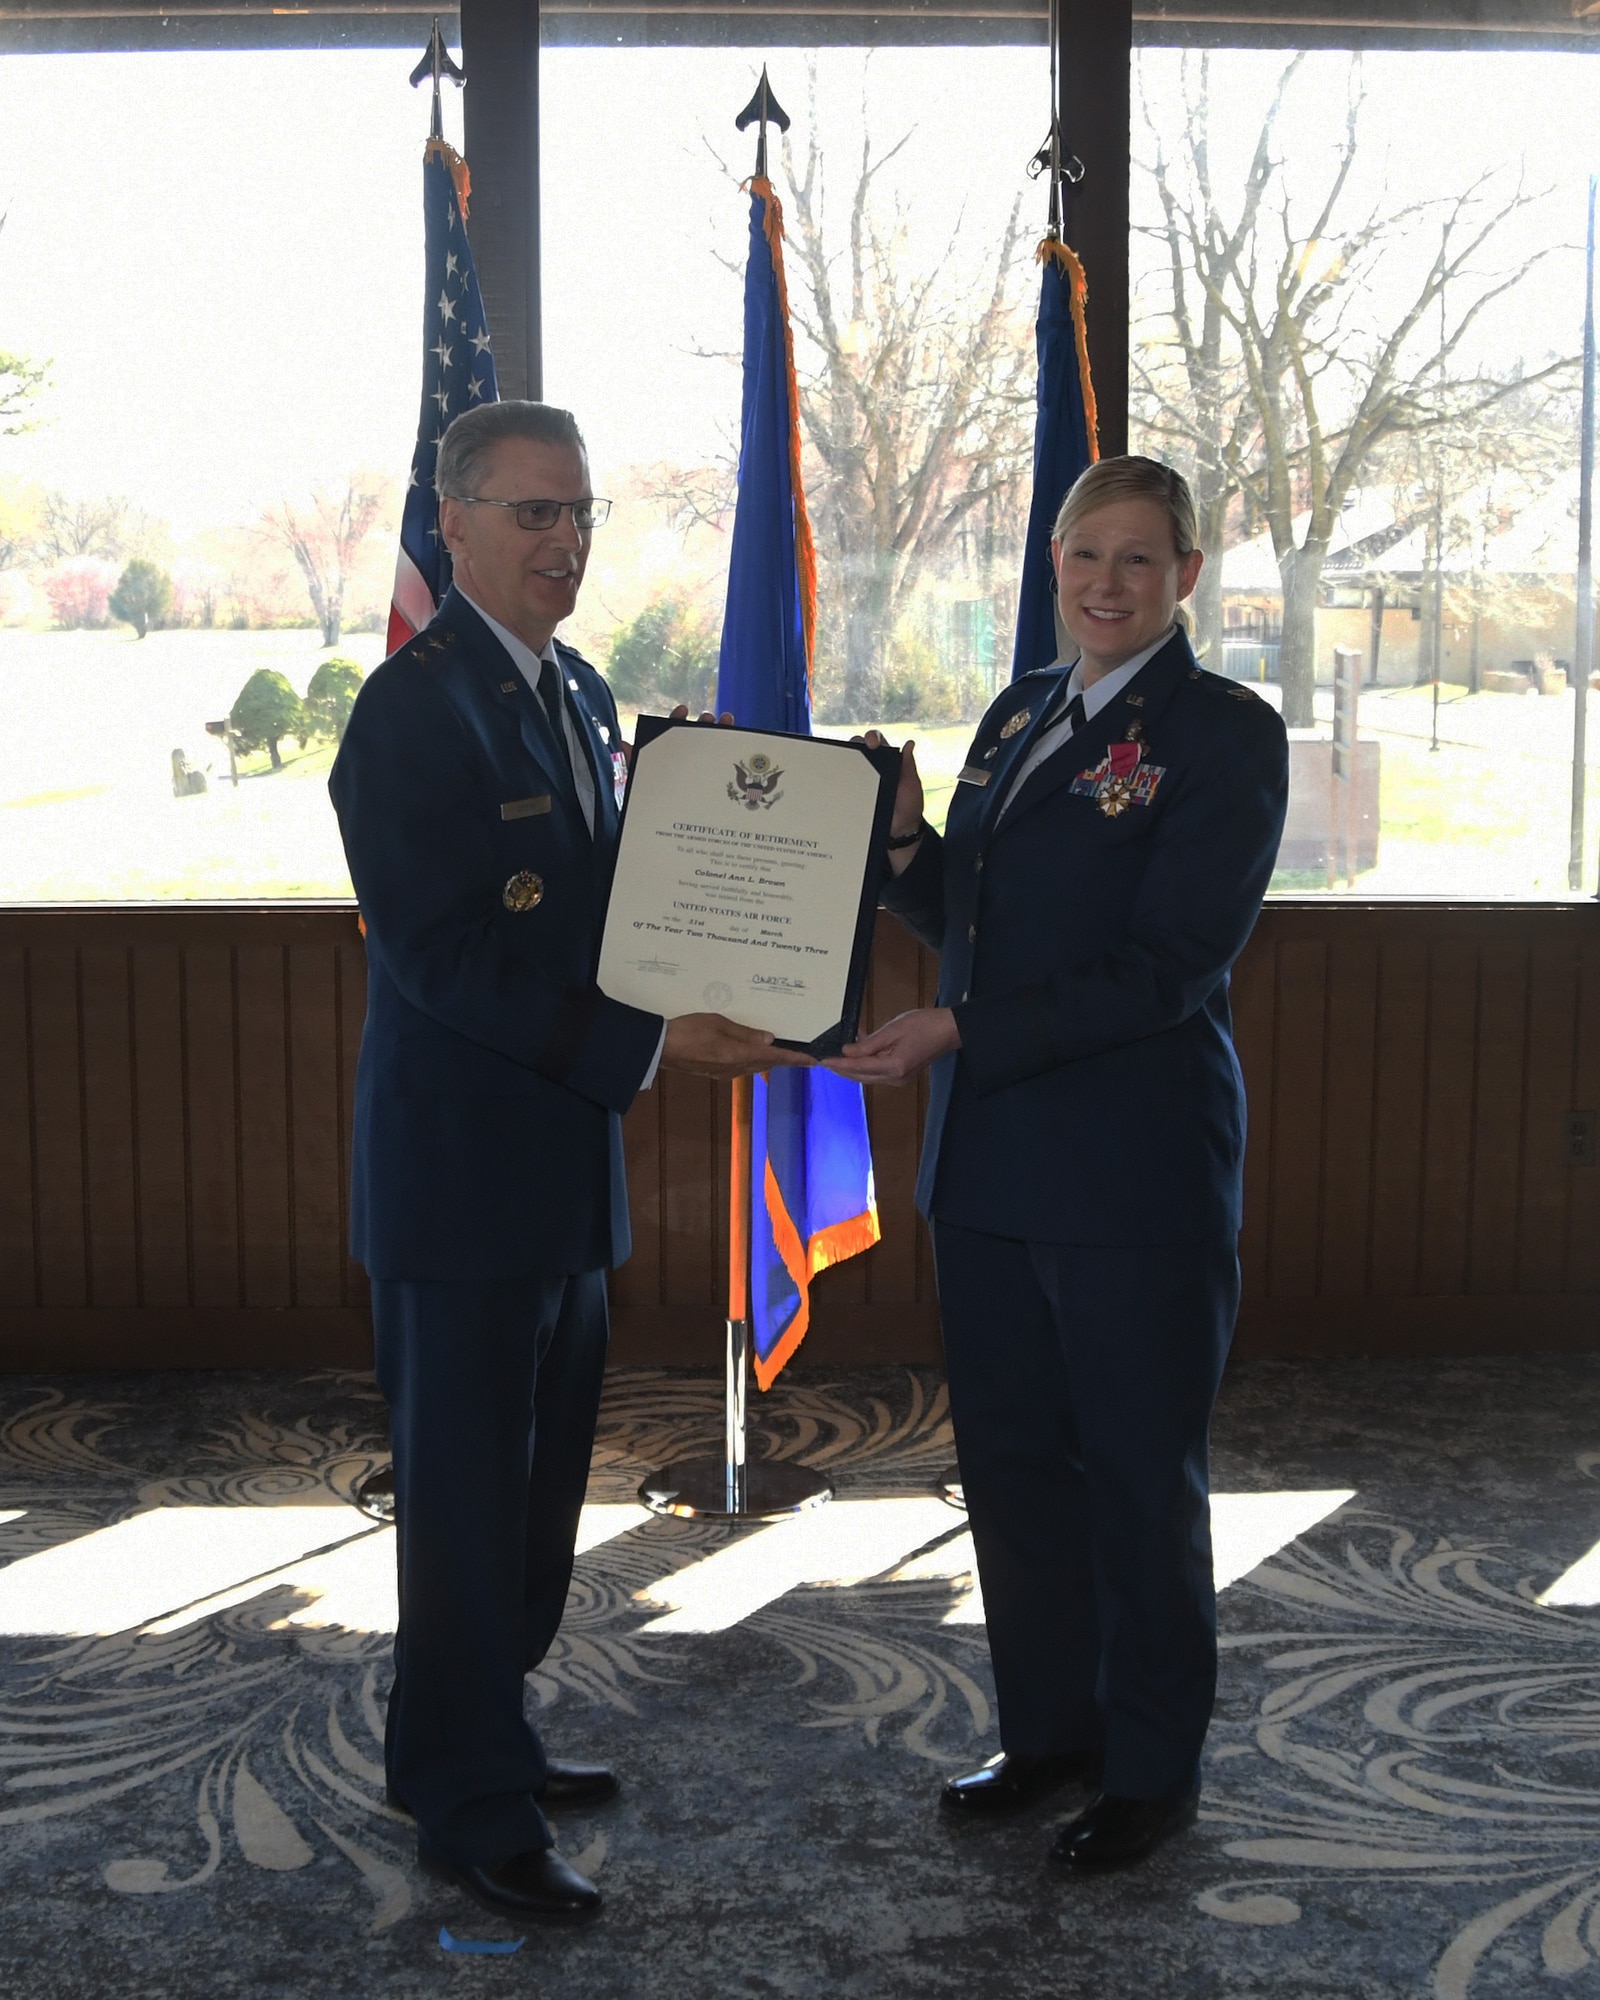 Col. Ann Brown, 459th Mission Support Group Commander, retired from the Air Force March 5, 2023, at Joint Base Andrews, Md. Her retirement ceremony held at The Courses at Andrews caps more than 33 years of honorable, decorated service. Retired Maj. Gen. Randall Ogden was the presiding official of the ceremony. Gen. Ogden is also a former member of the 459th Air Refueling Wing.